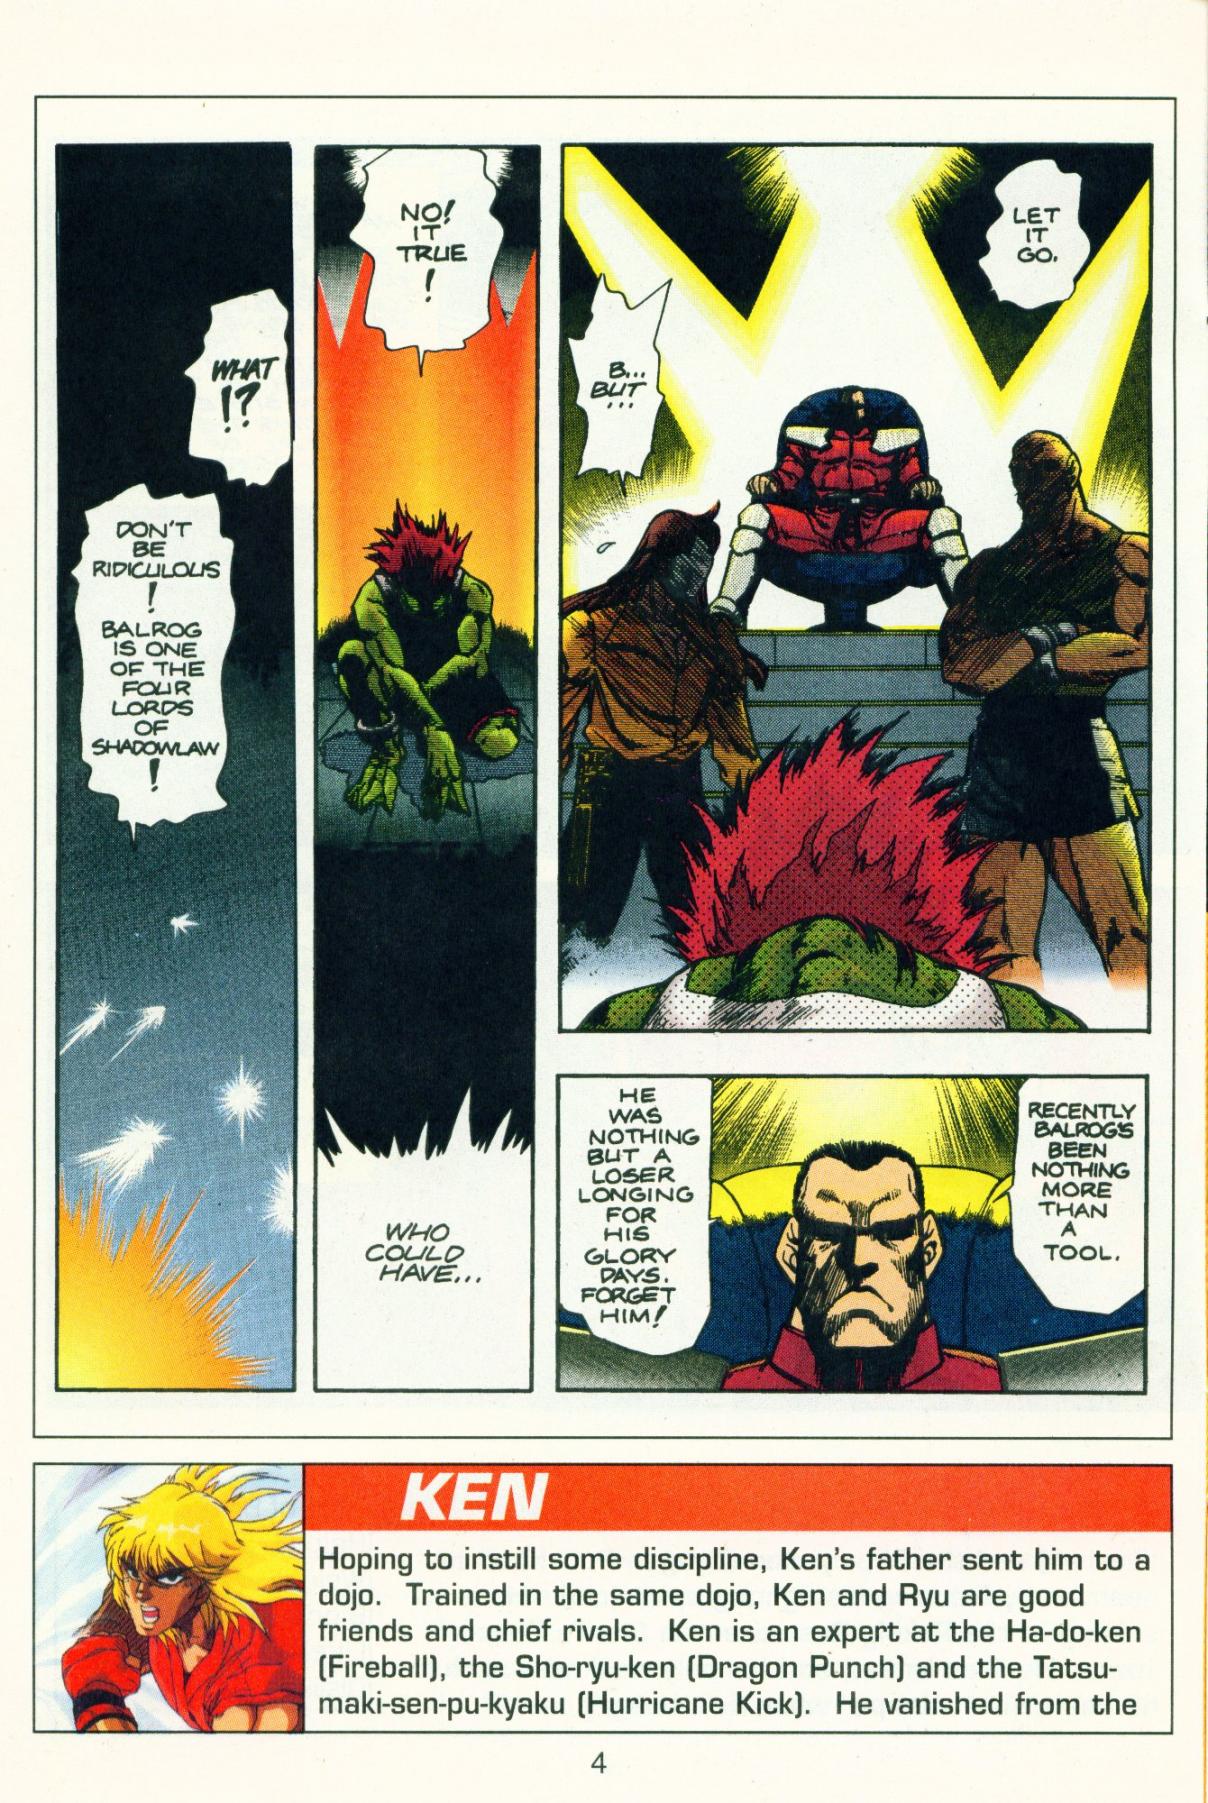 Street Fighter II Vol. 1 Ch. 3 Recall [COLORED]